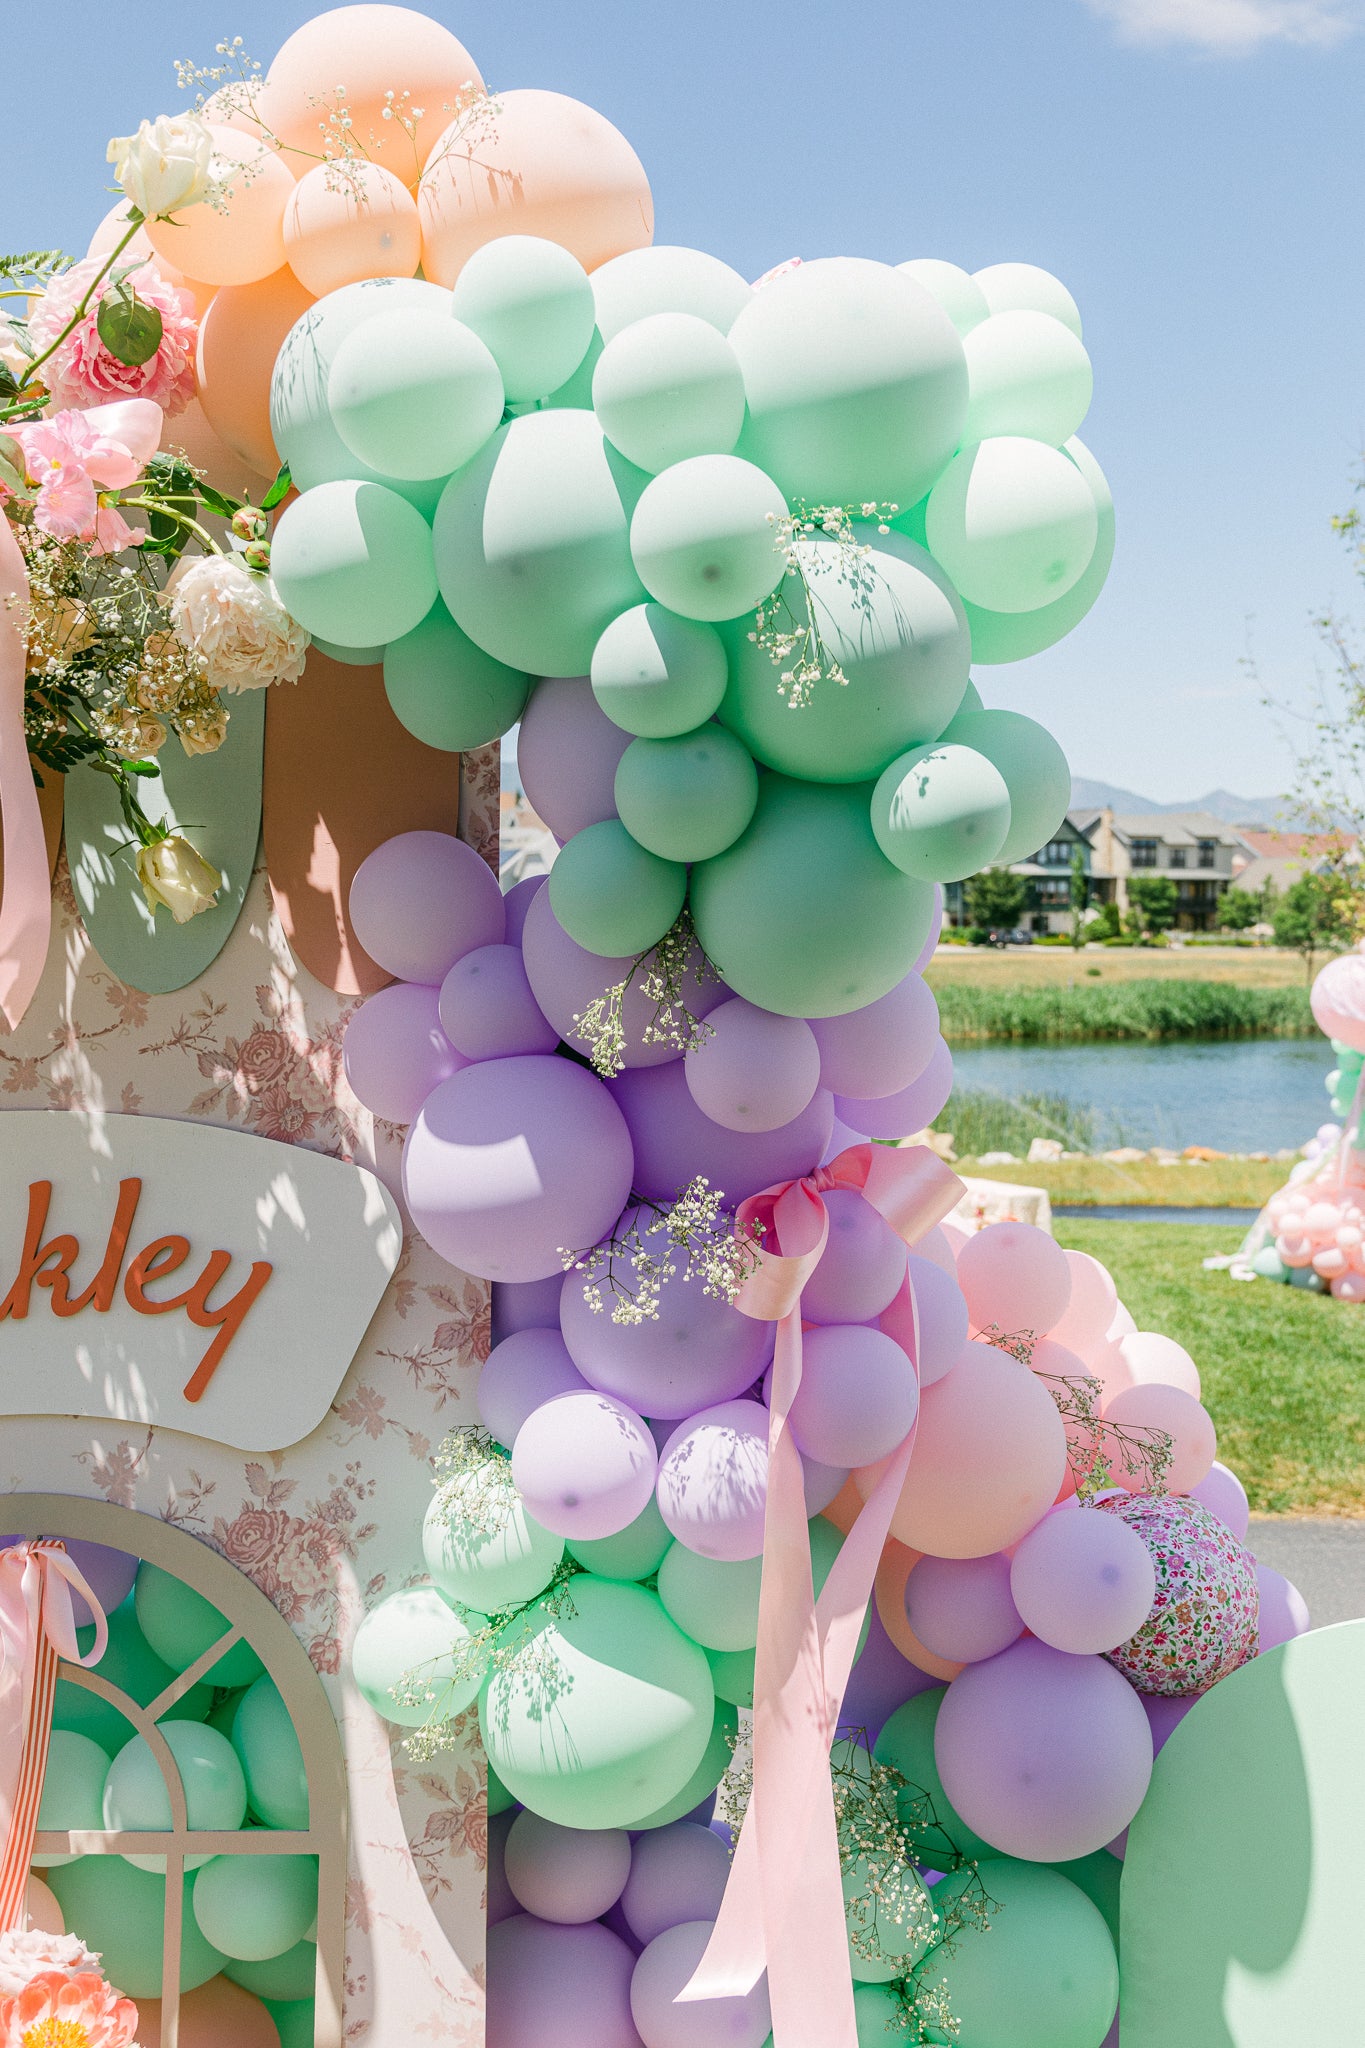 Pastel balloon garland decoration with flowers and bows for a girl's Paris-themed birthday party.